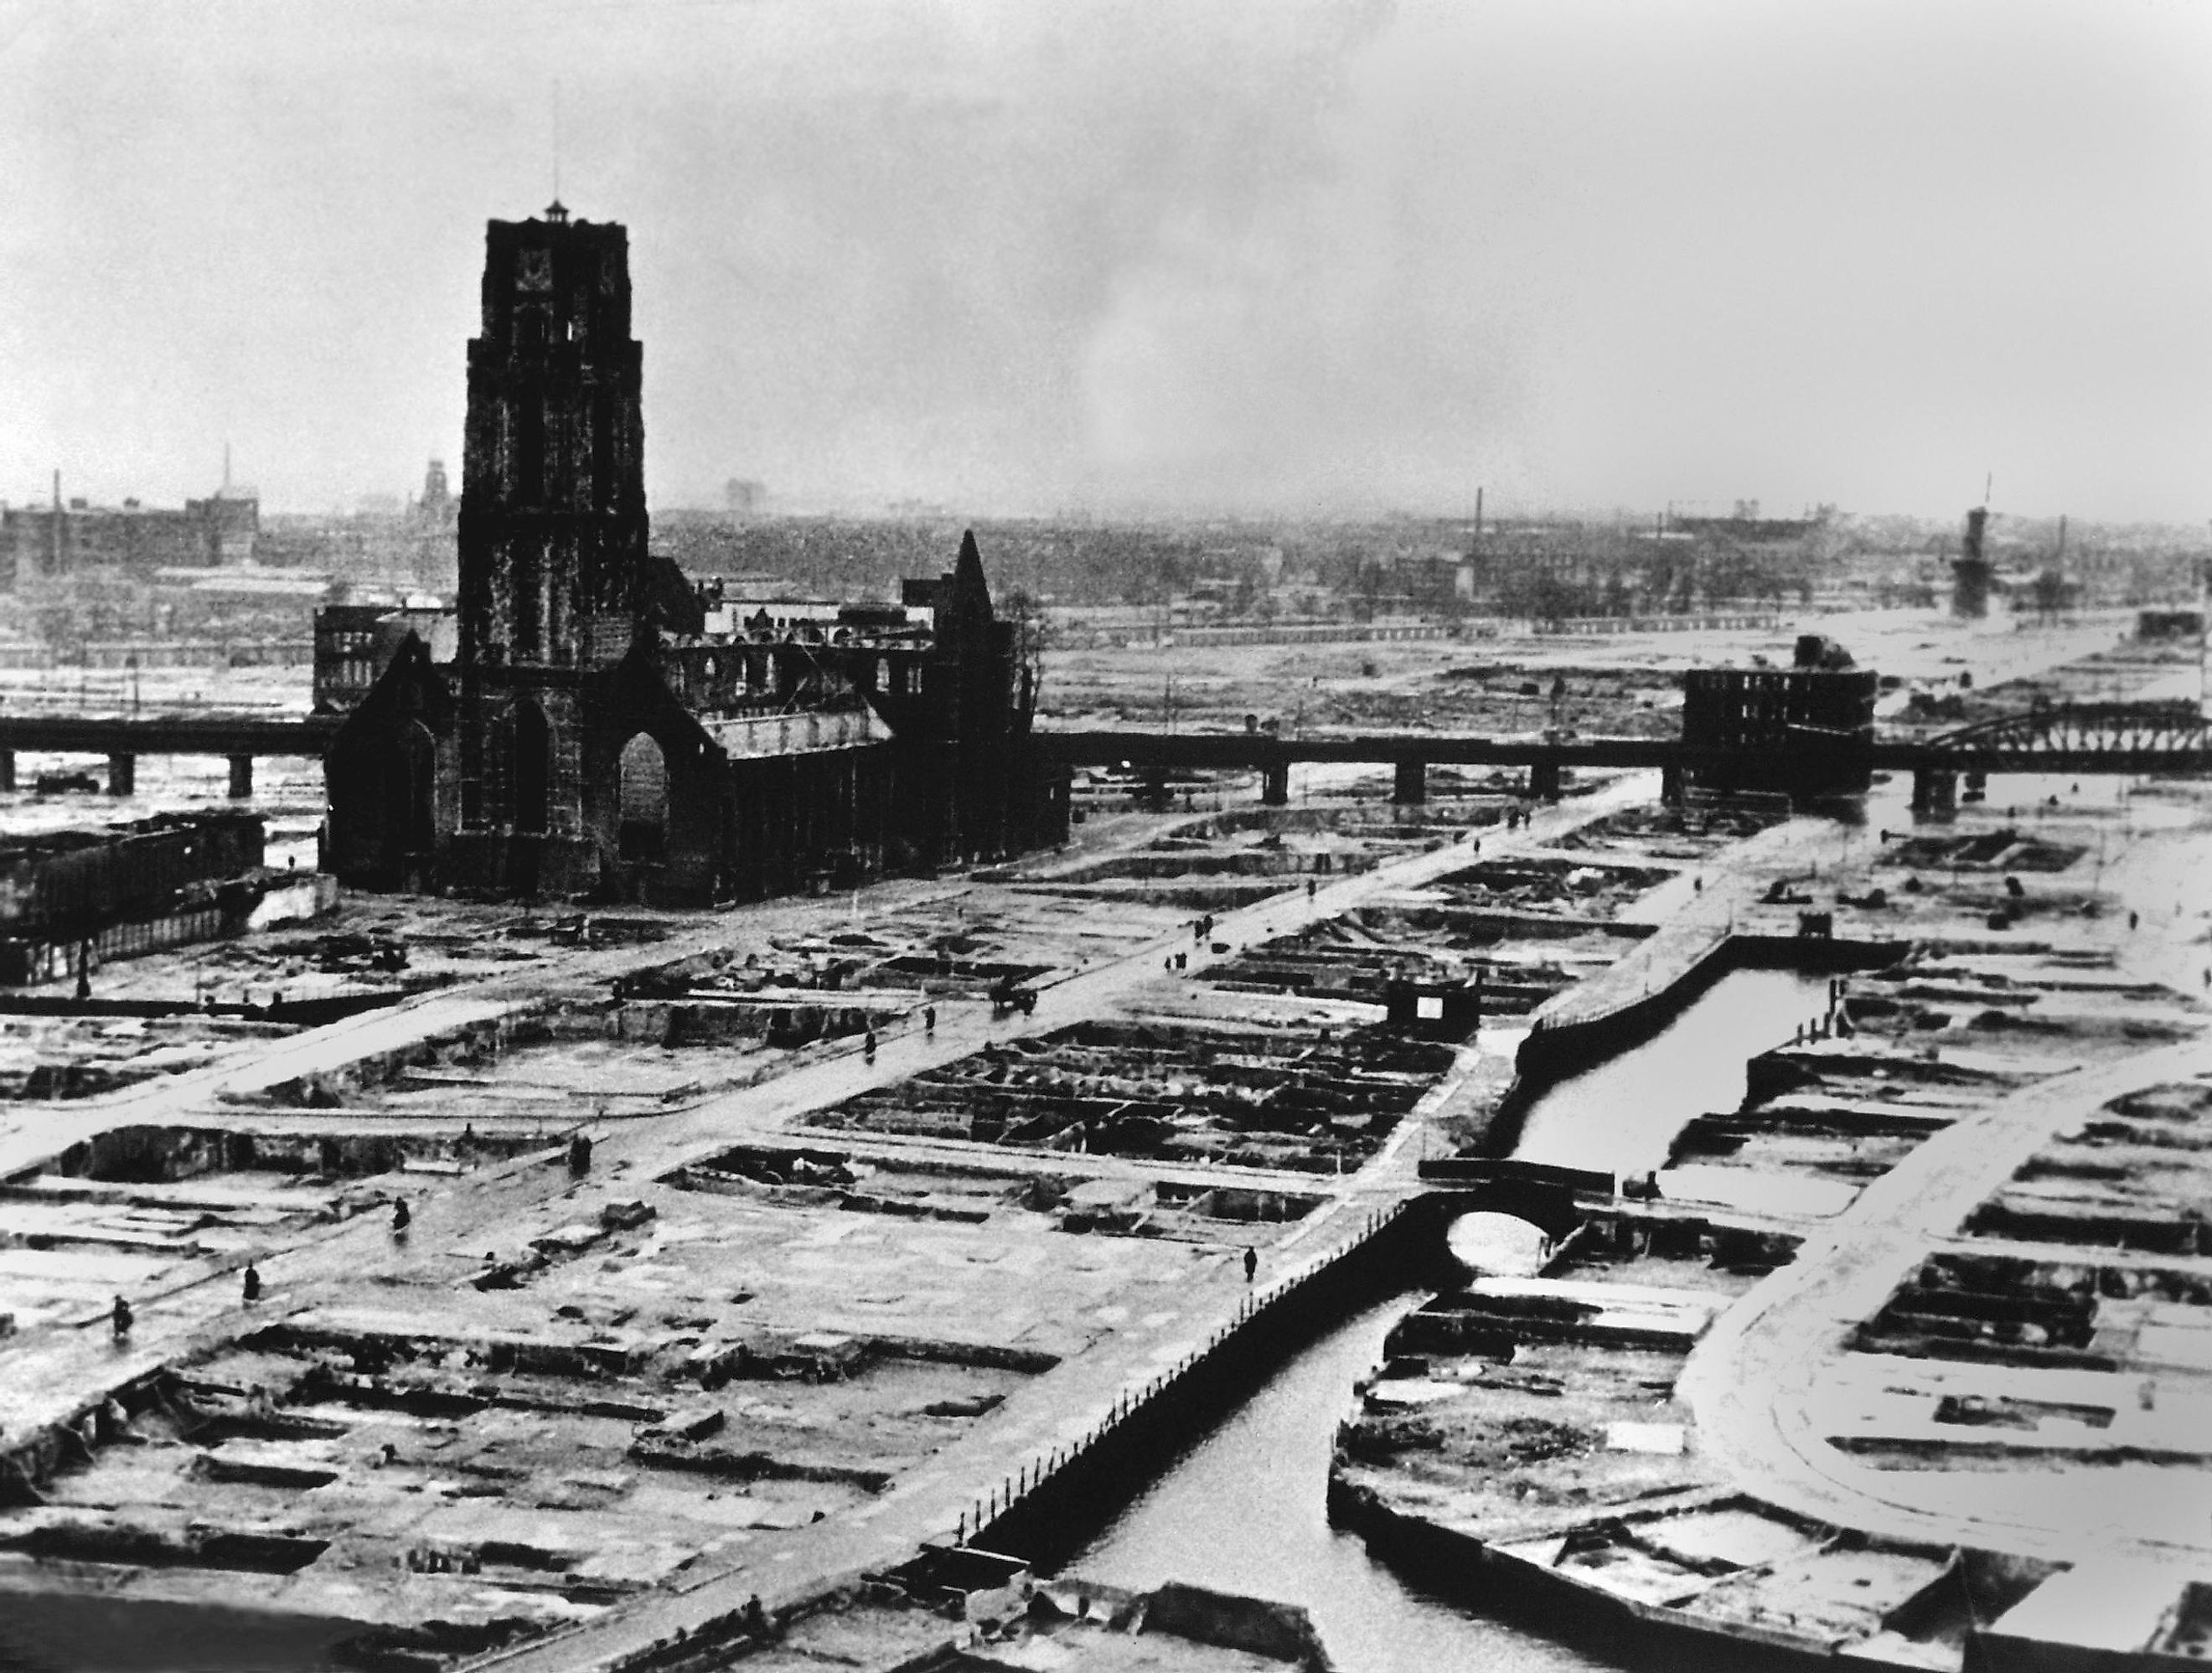 Rotterdam after the entire inner city was bombed by Germans, May 14, 1940. 30,000 civilians were killed when the Dutch defenders refused a German ultimatum to cease defense and surrender.